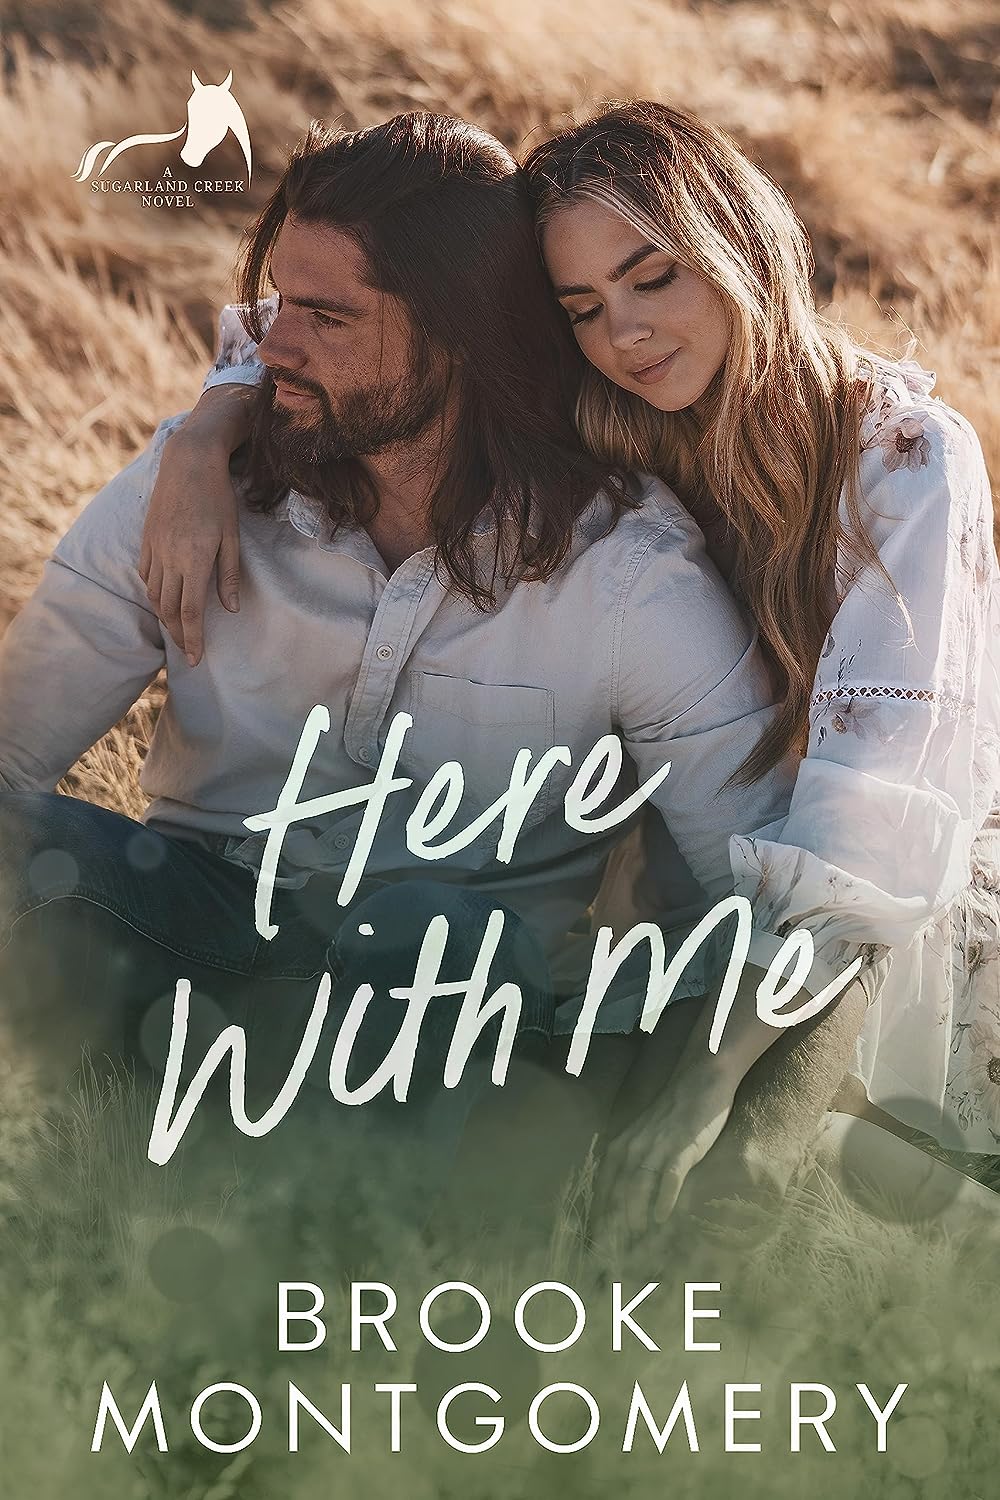 the cover of here with me by brooke montgomery